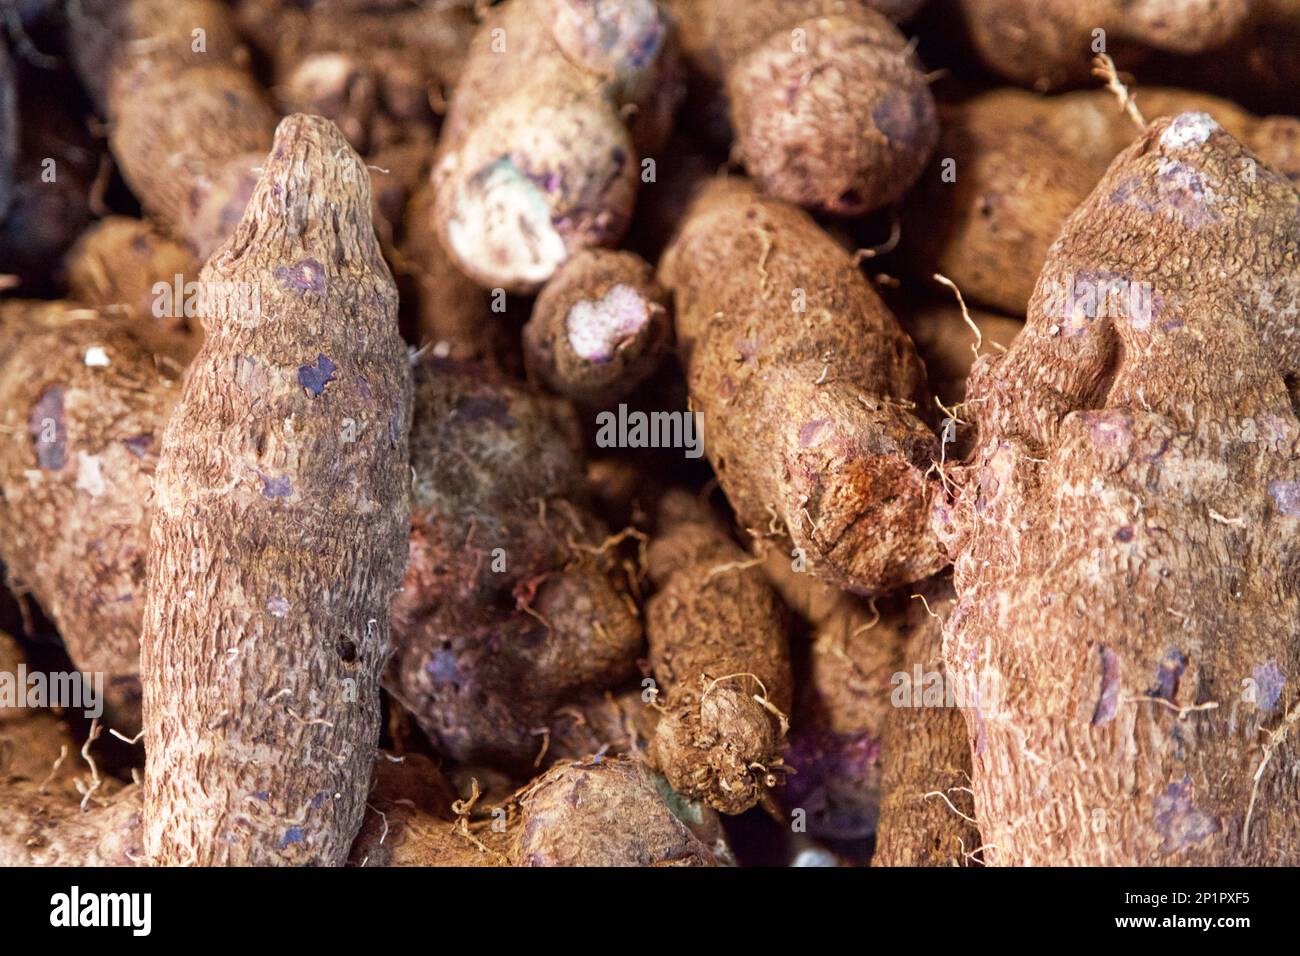 Full frame close-up on a stack of purple yams on a market stall. Stock Photo